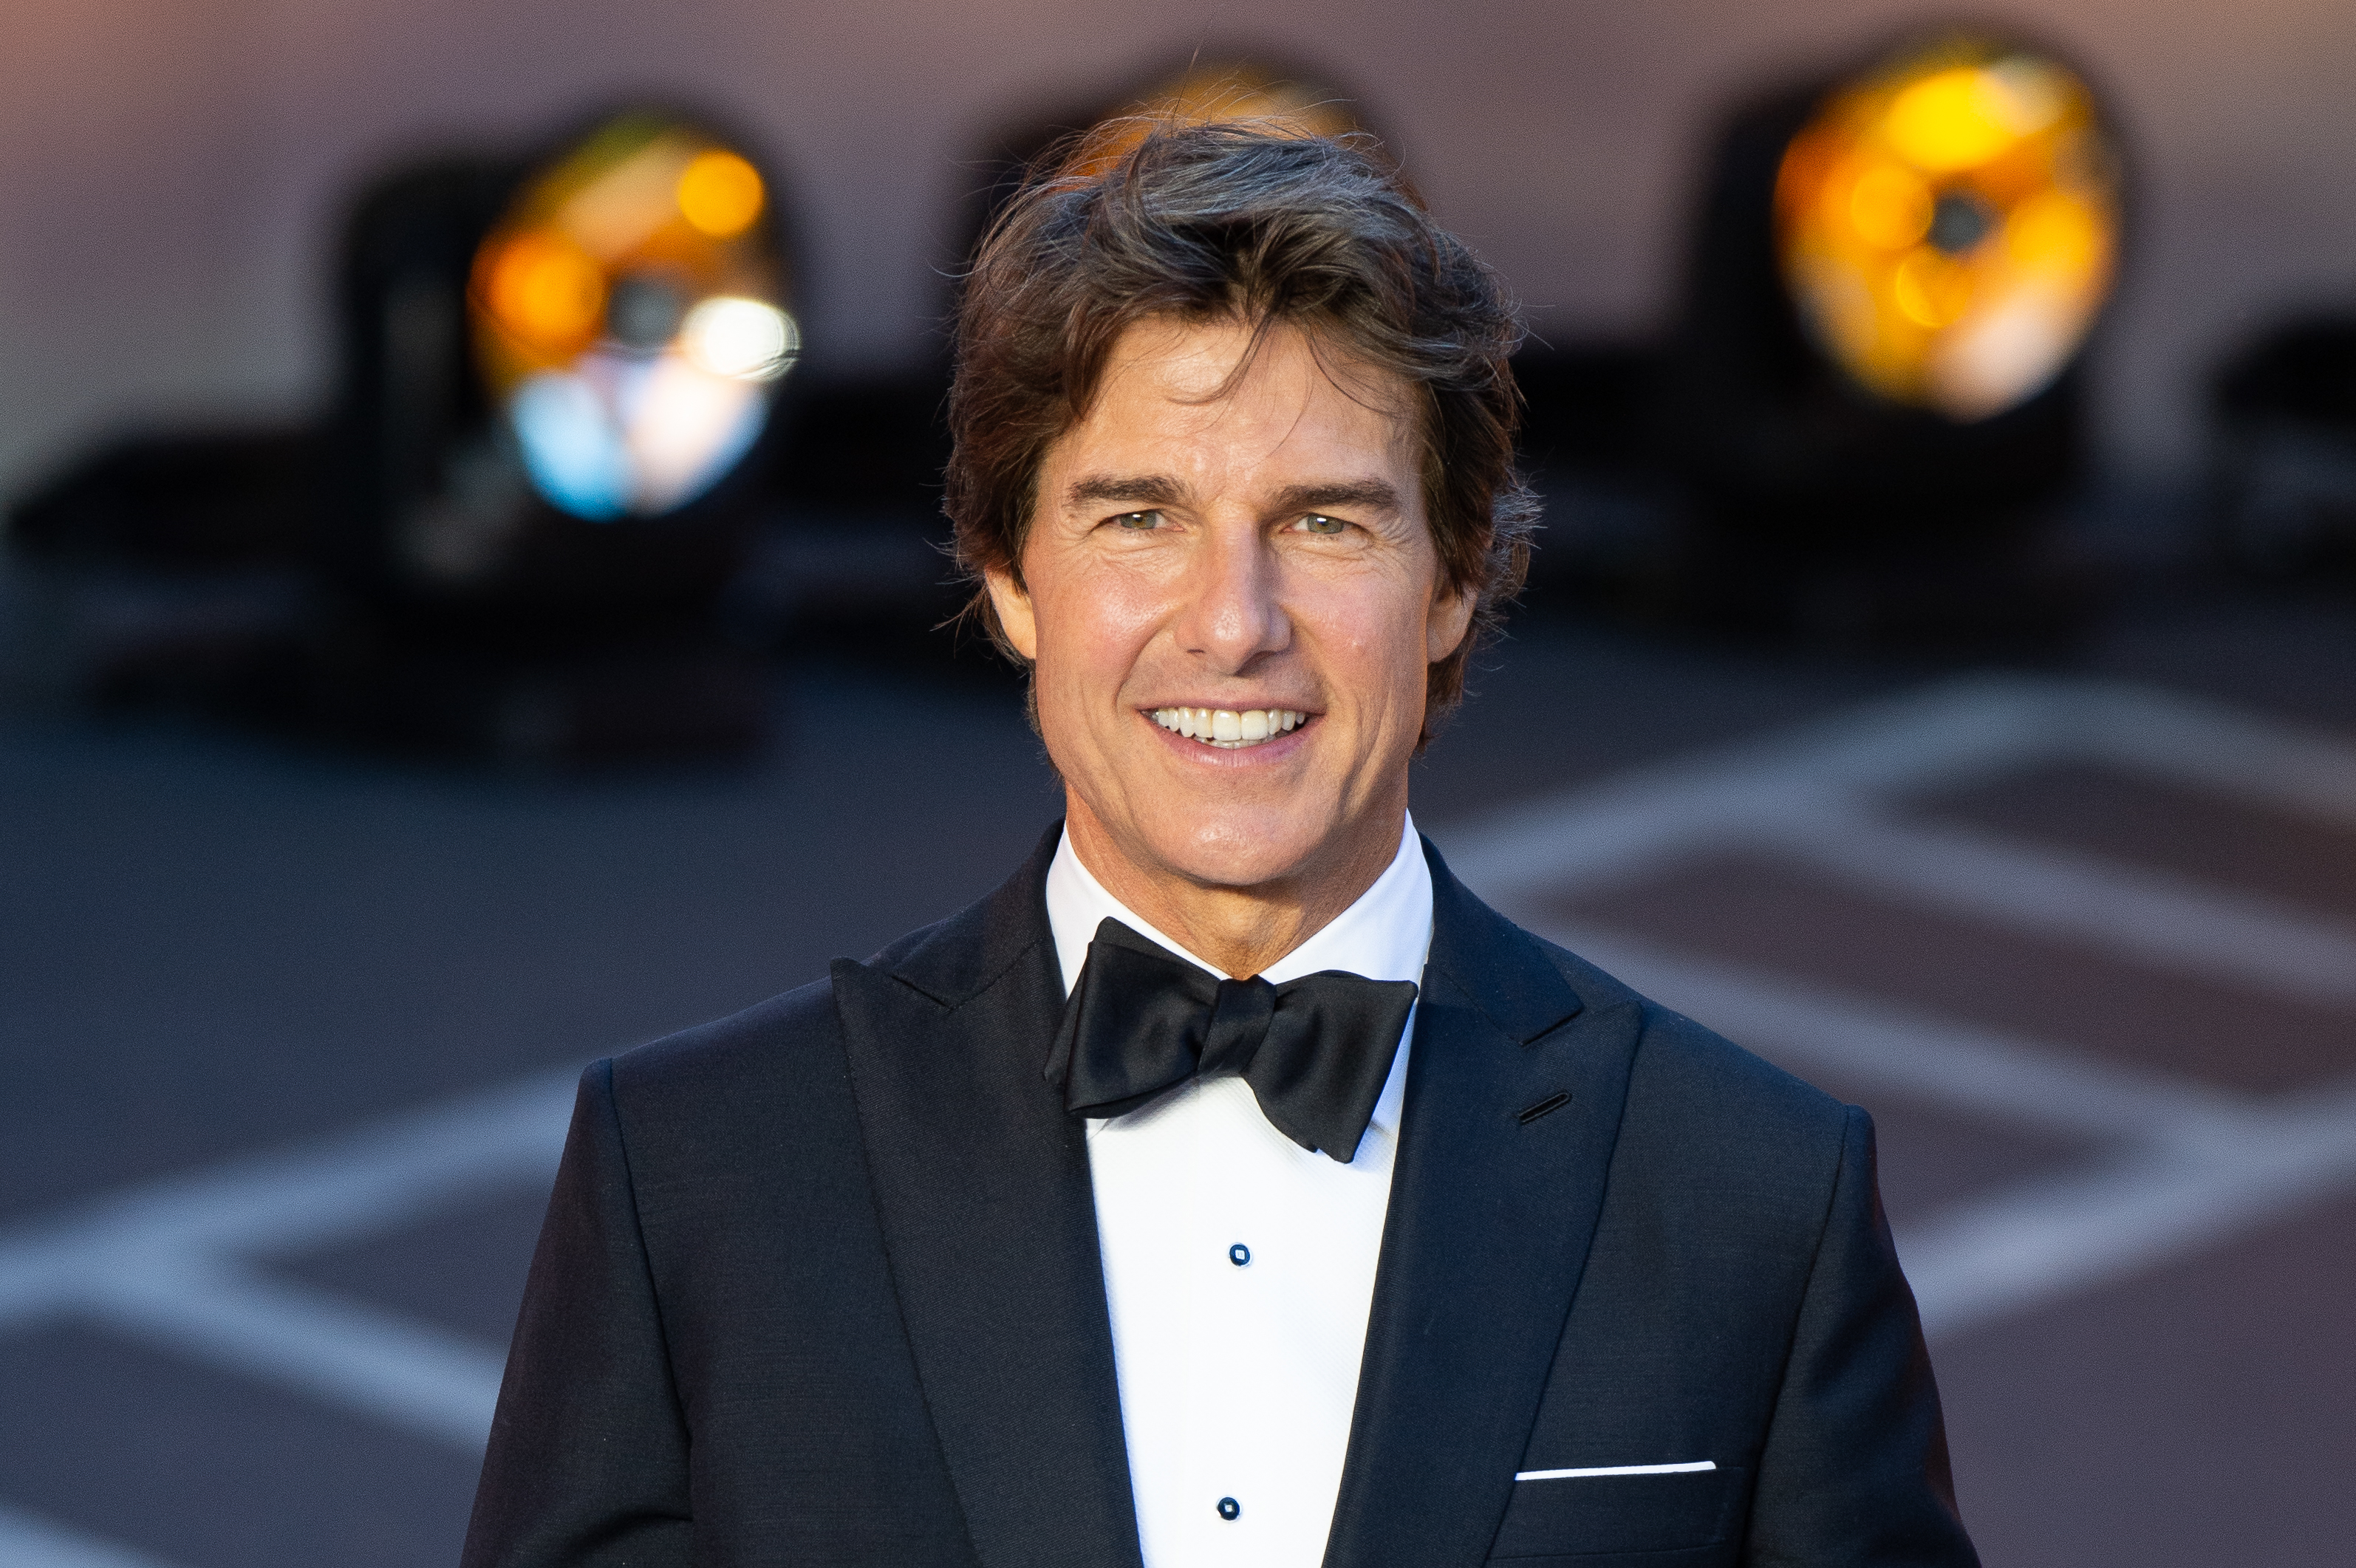 Tom Cruise smiles on the red carpet in a formal black tuxedo with a bow tie